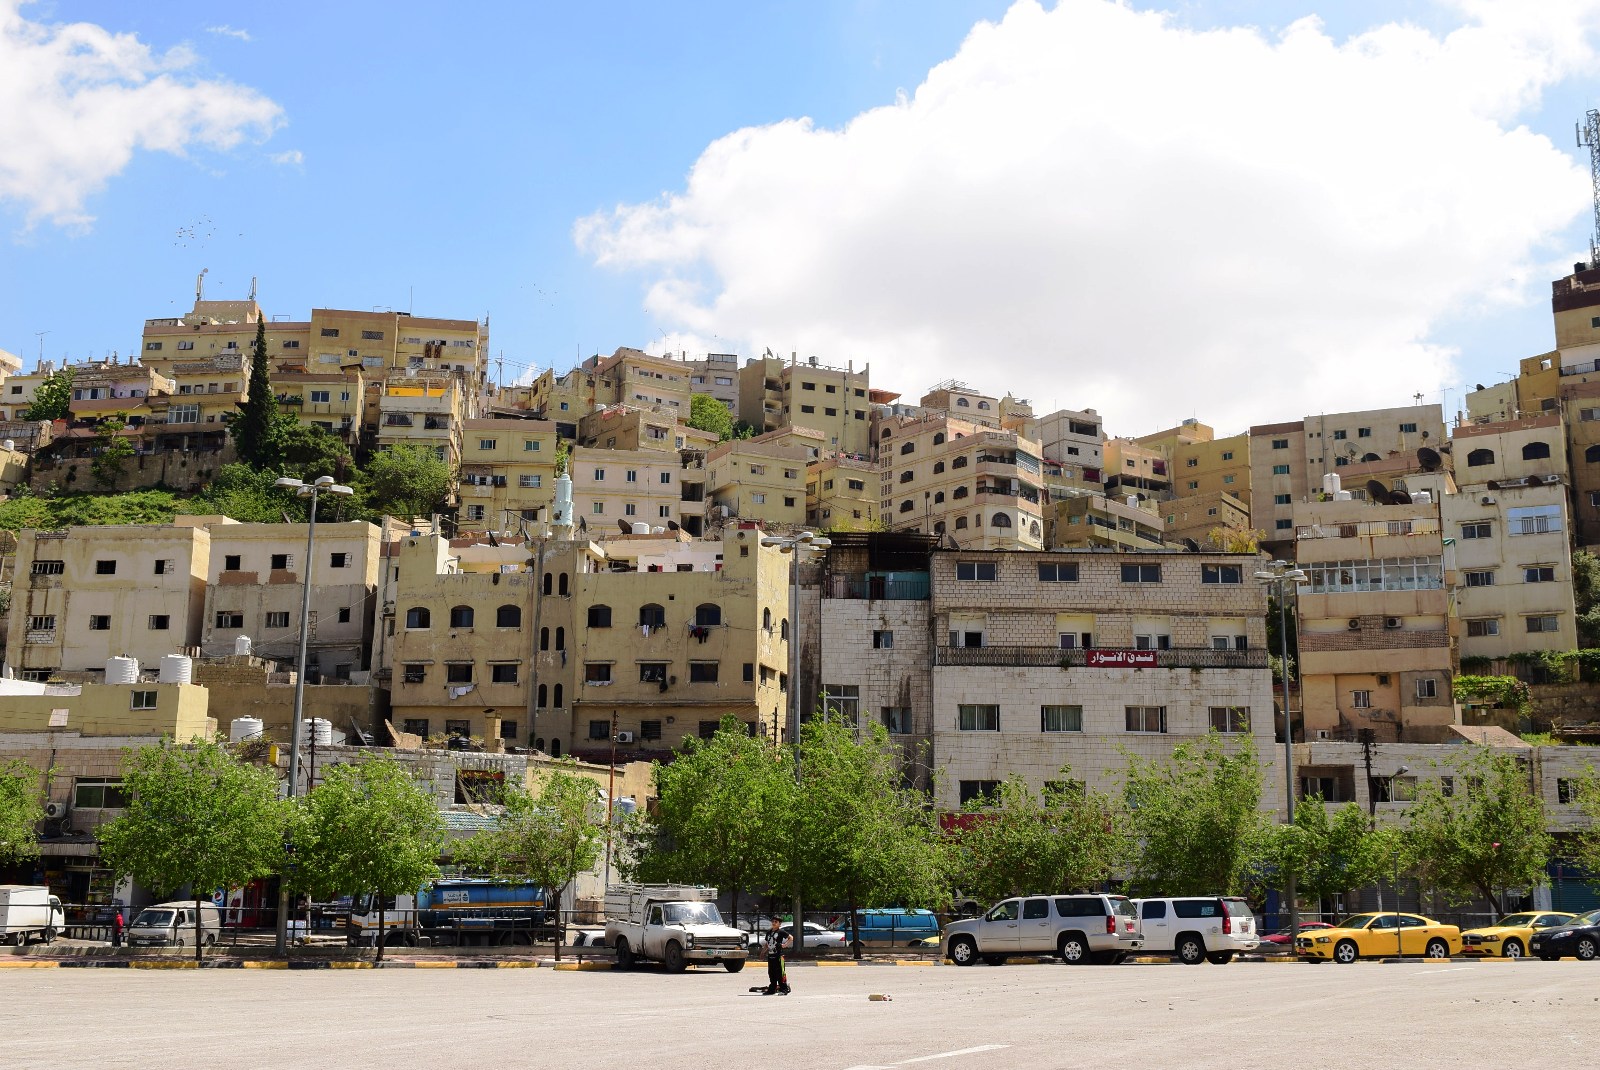 Discovering Amman in a day